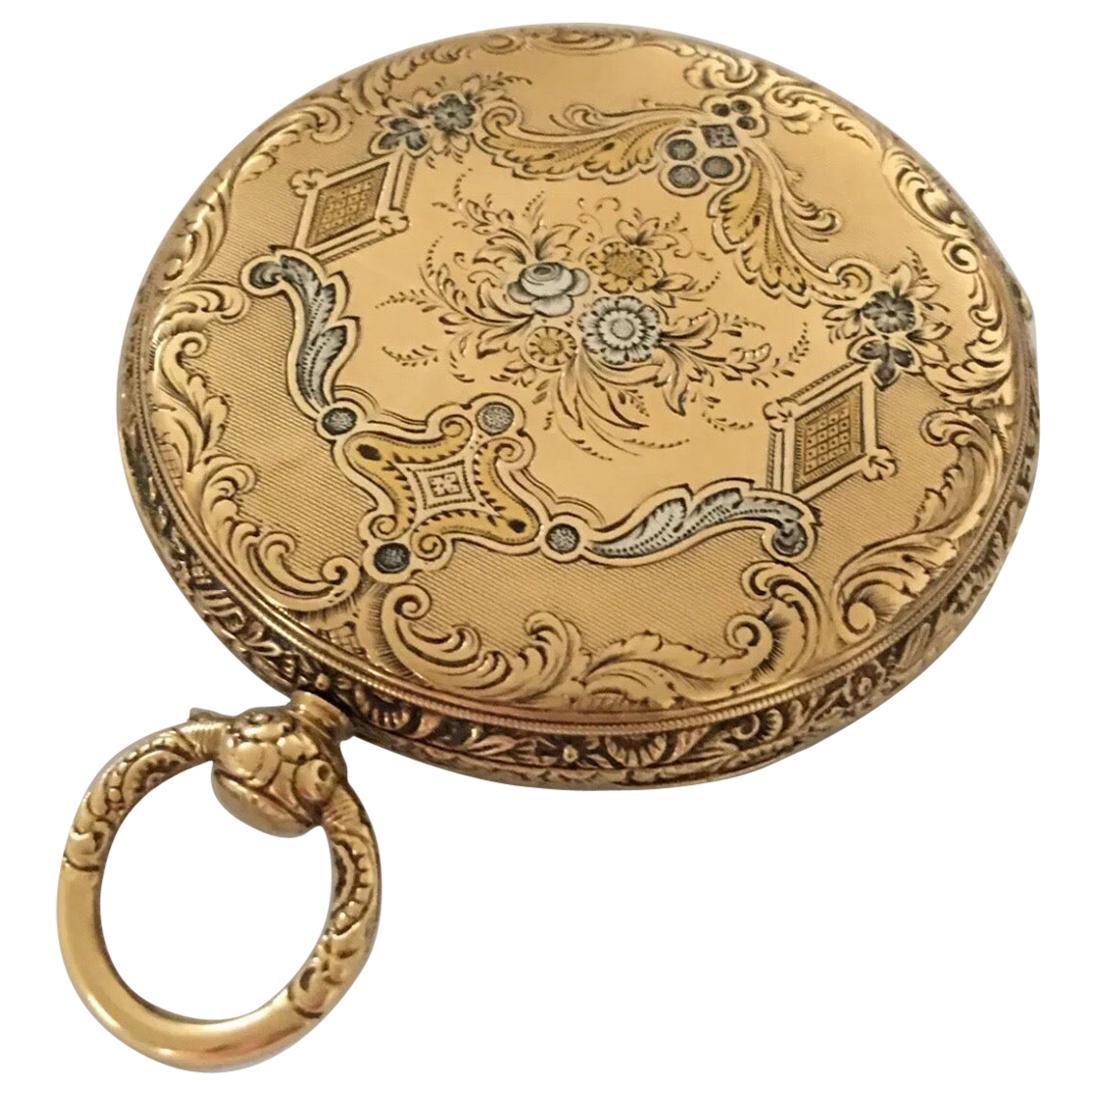 Antique Gold Plated Key-wind Pocket Watch.


This very fine quality watch is in good working order and immaculate condition. it comes with a winding key.